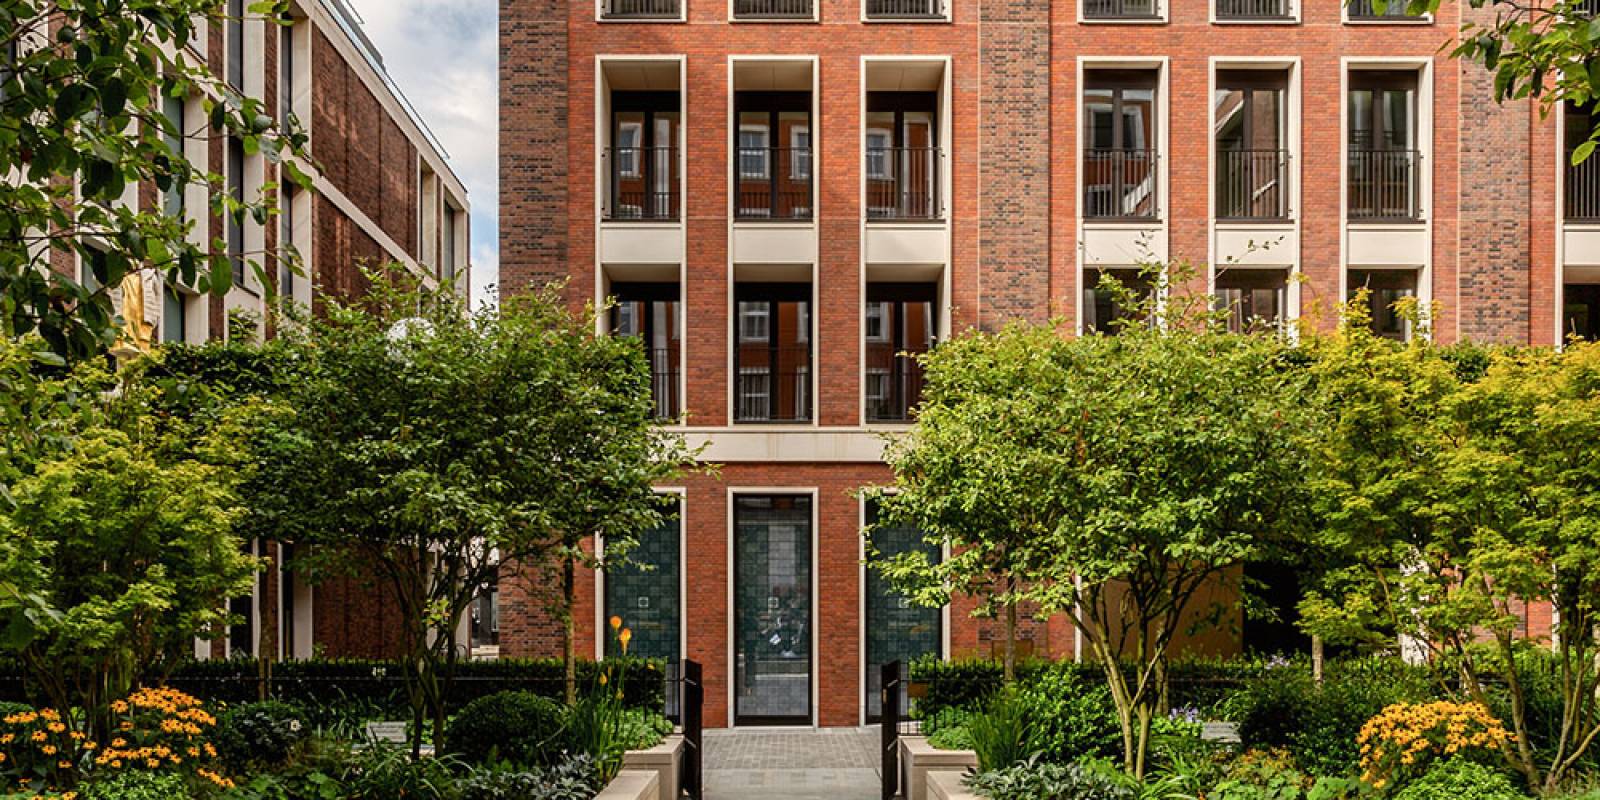 1newhomes Shares All Gems Of SW1